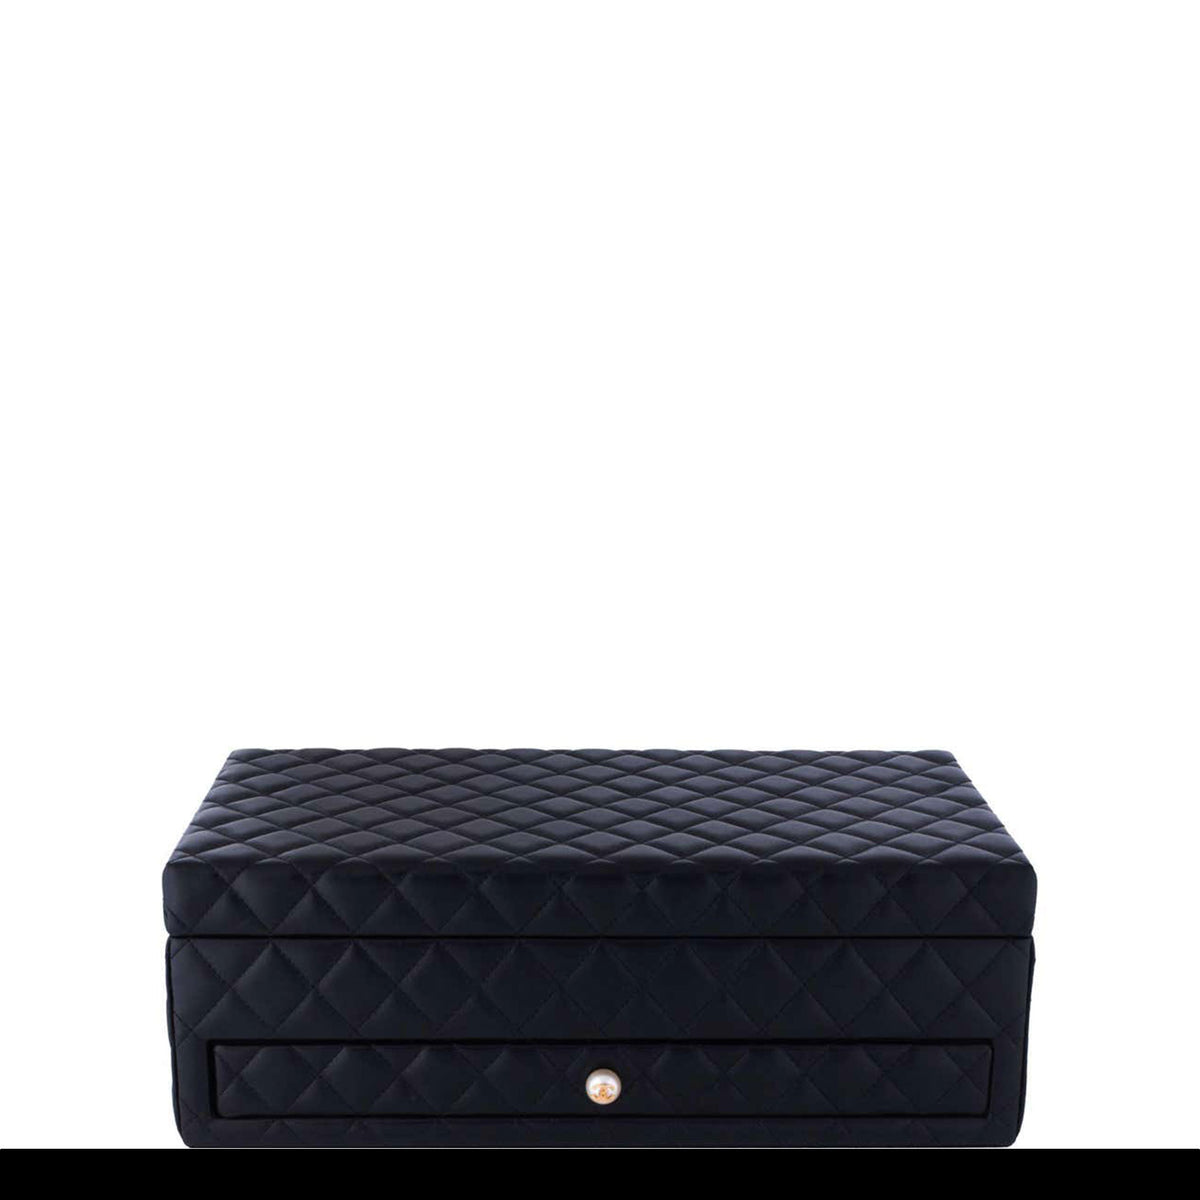 Chanel Limited Edition Black Vanity Case Rare Home Decor Jewelry Box –  House of Carver